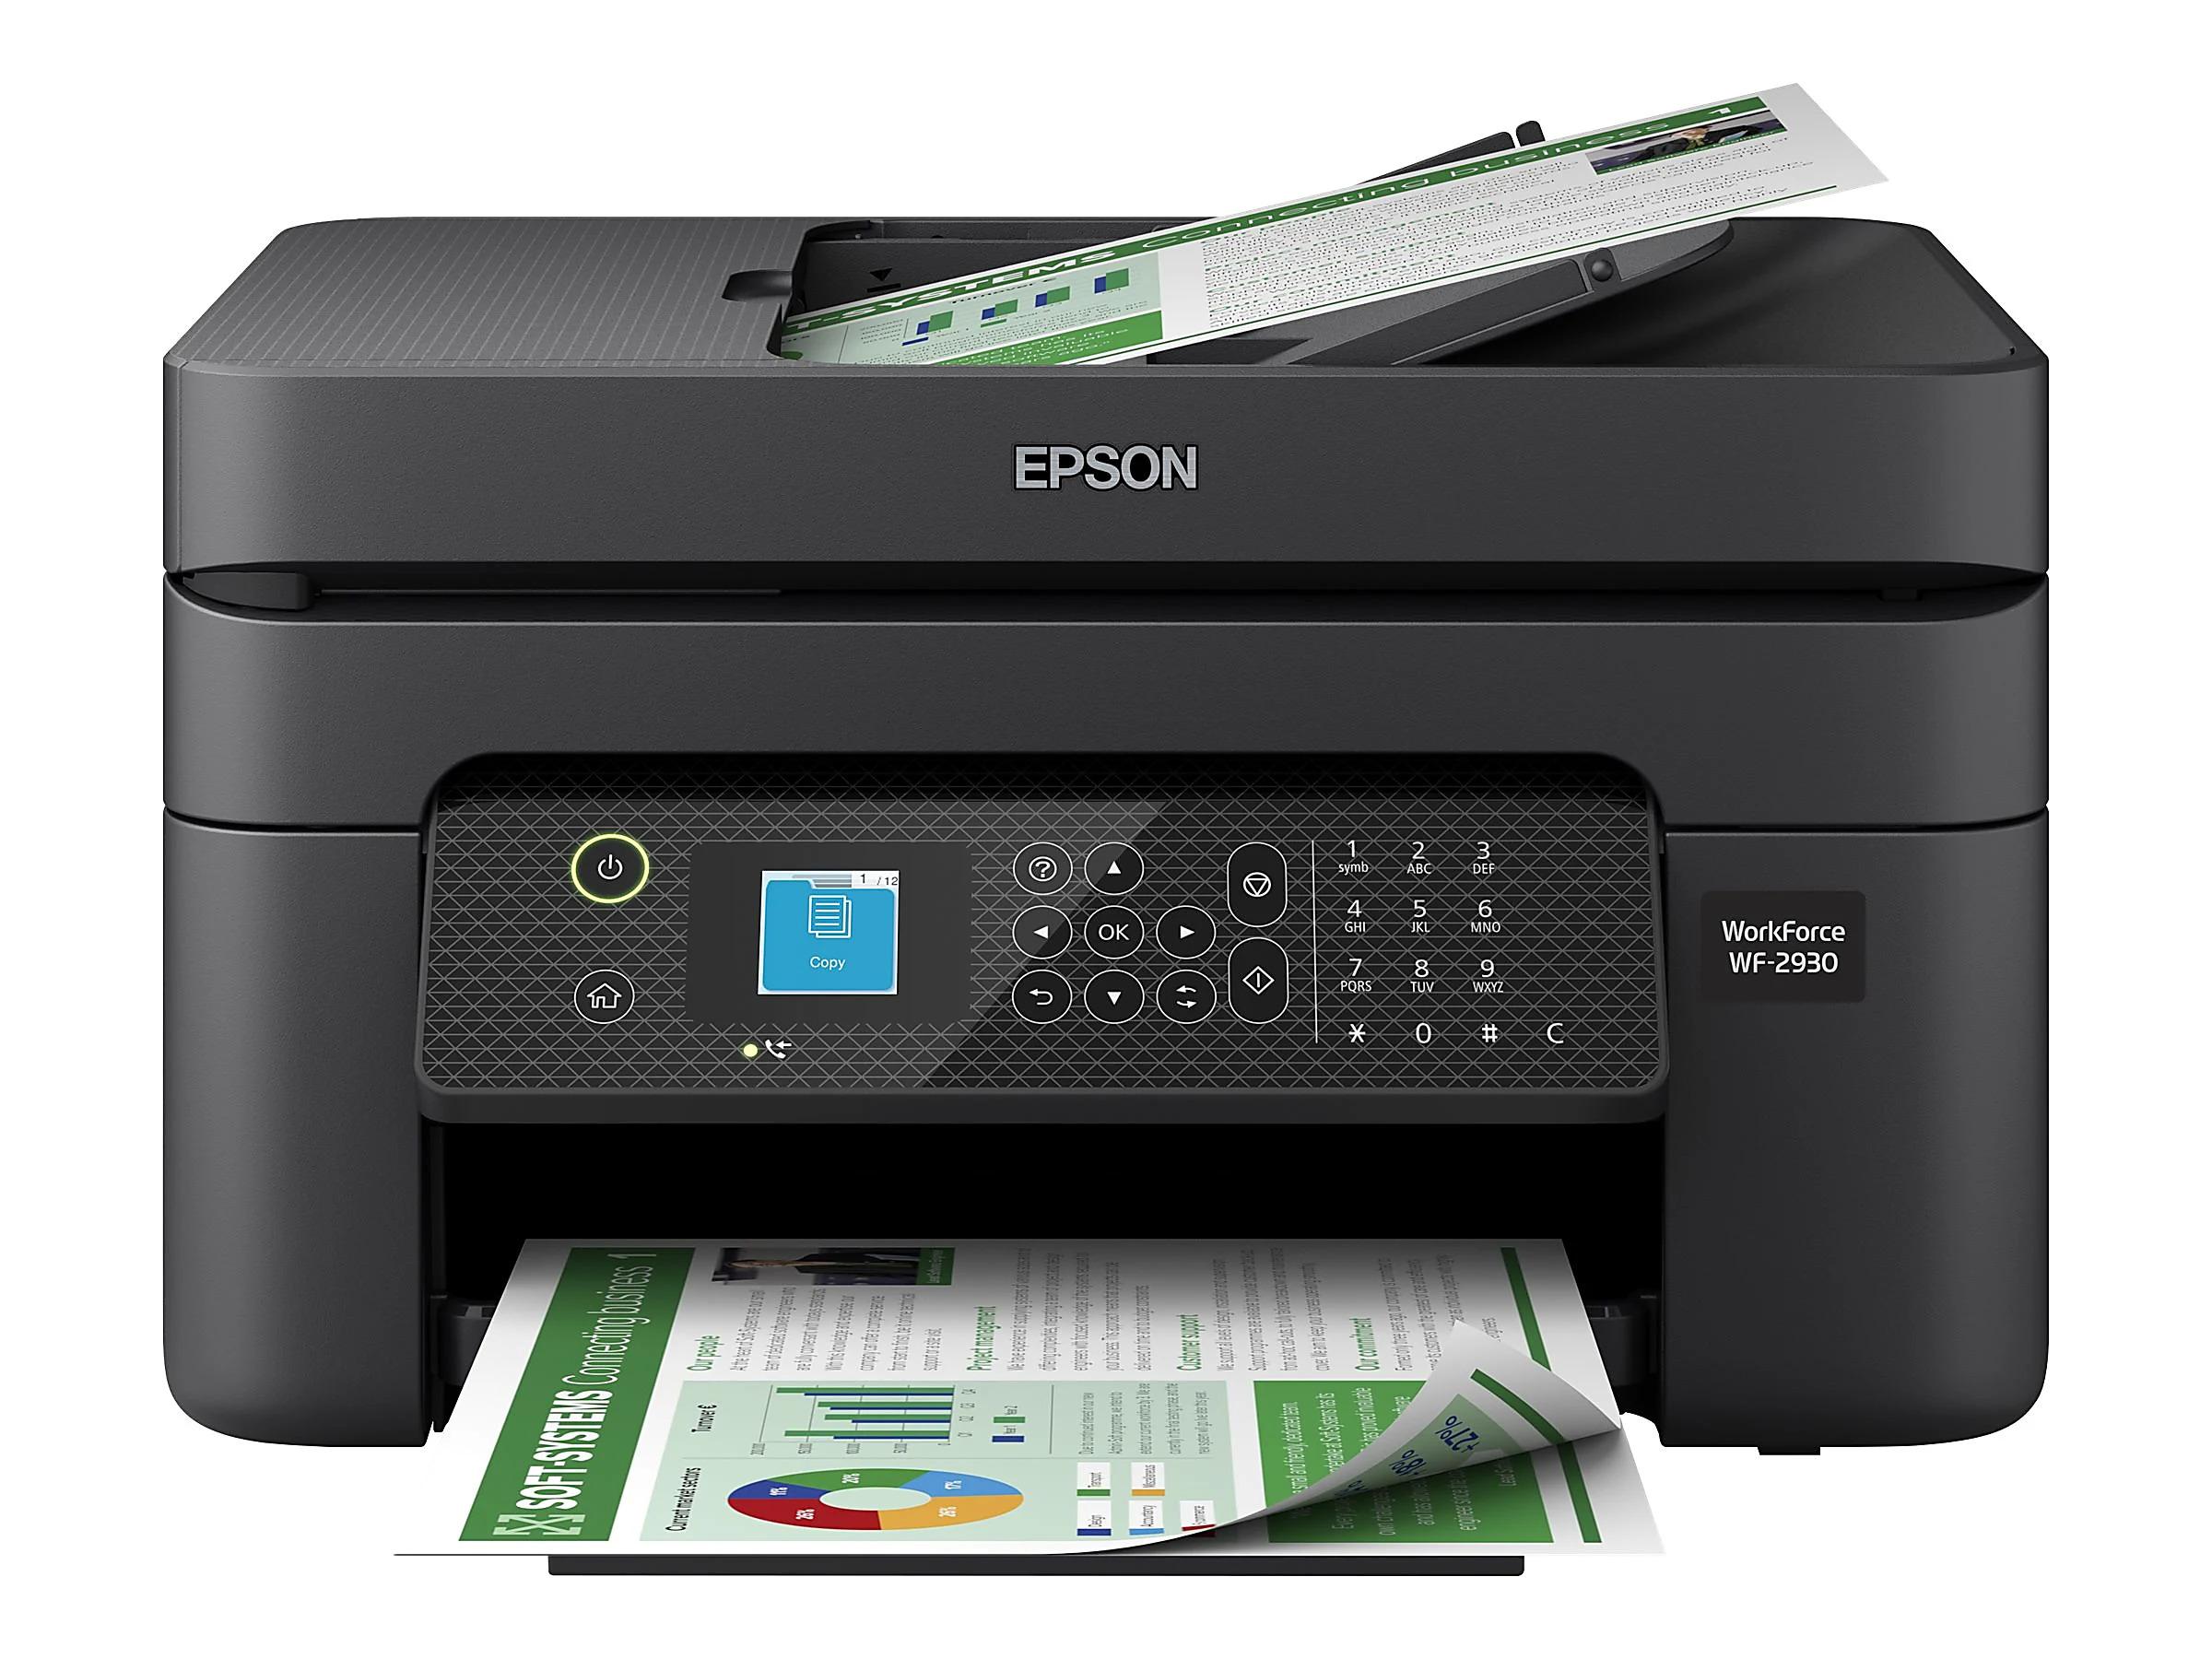 Epson WorkForce WF-2930 Wireless All-in-One Inkjet Printer for $54.60 Shipped